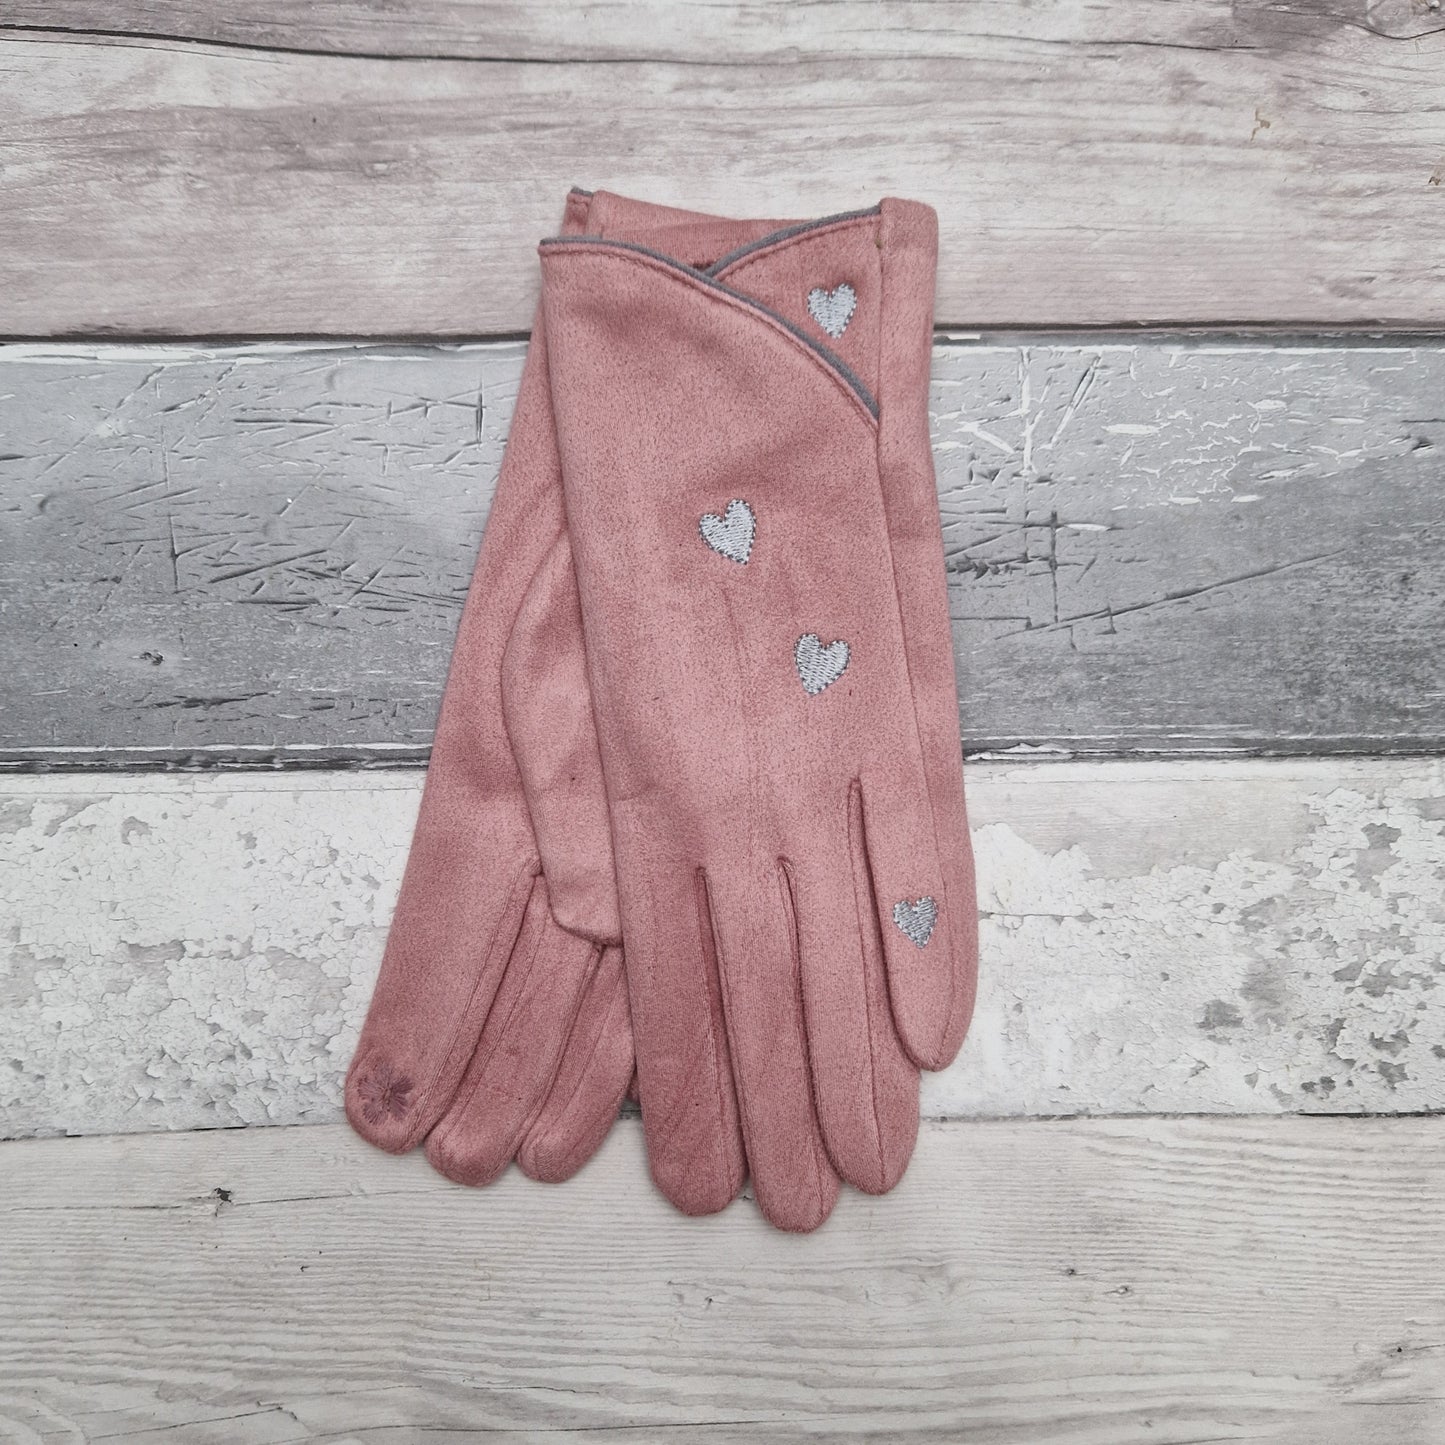 Pretty Pink gloves with grey love hearts